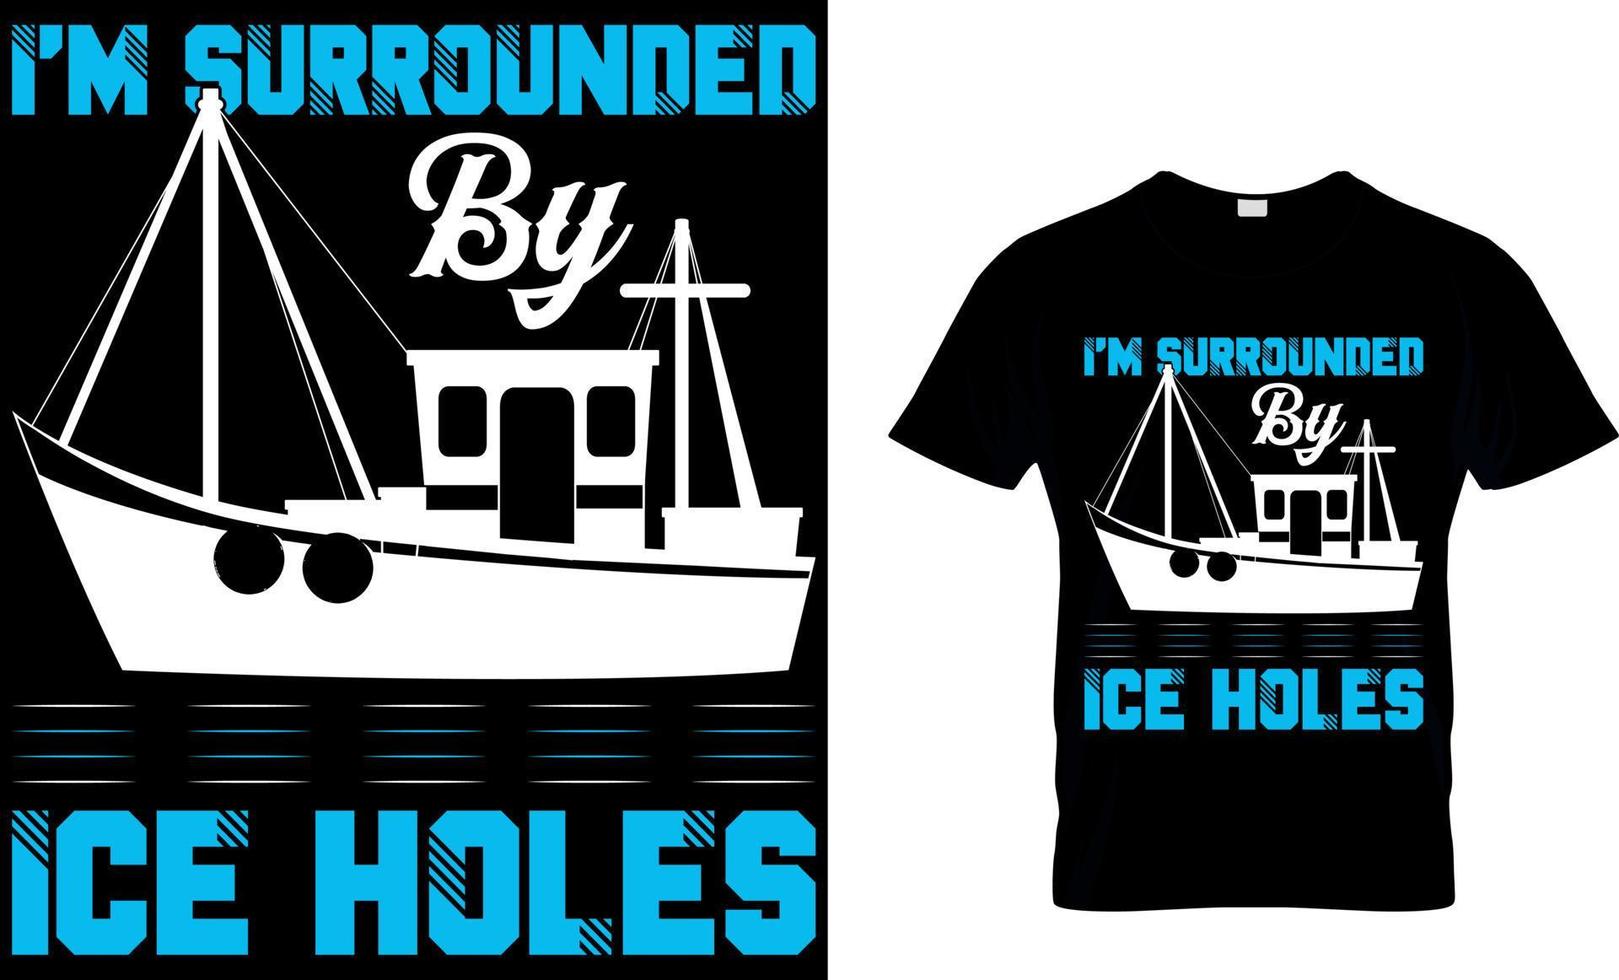 I'm surrounded by ice holes, fishing t-shirt design template. vector